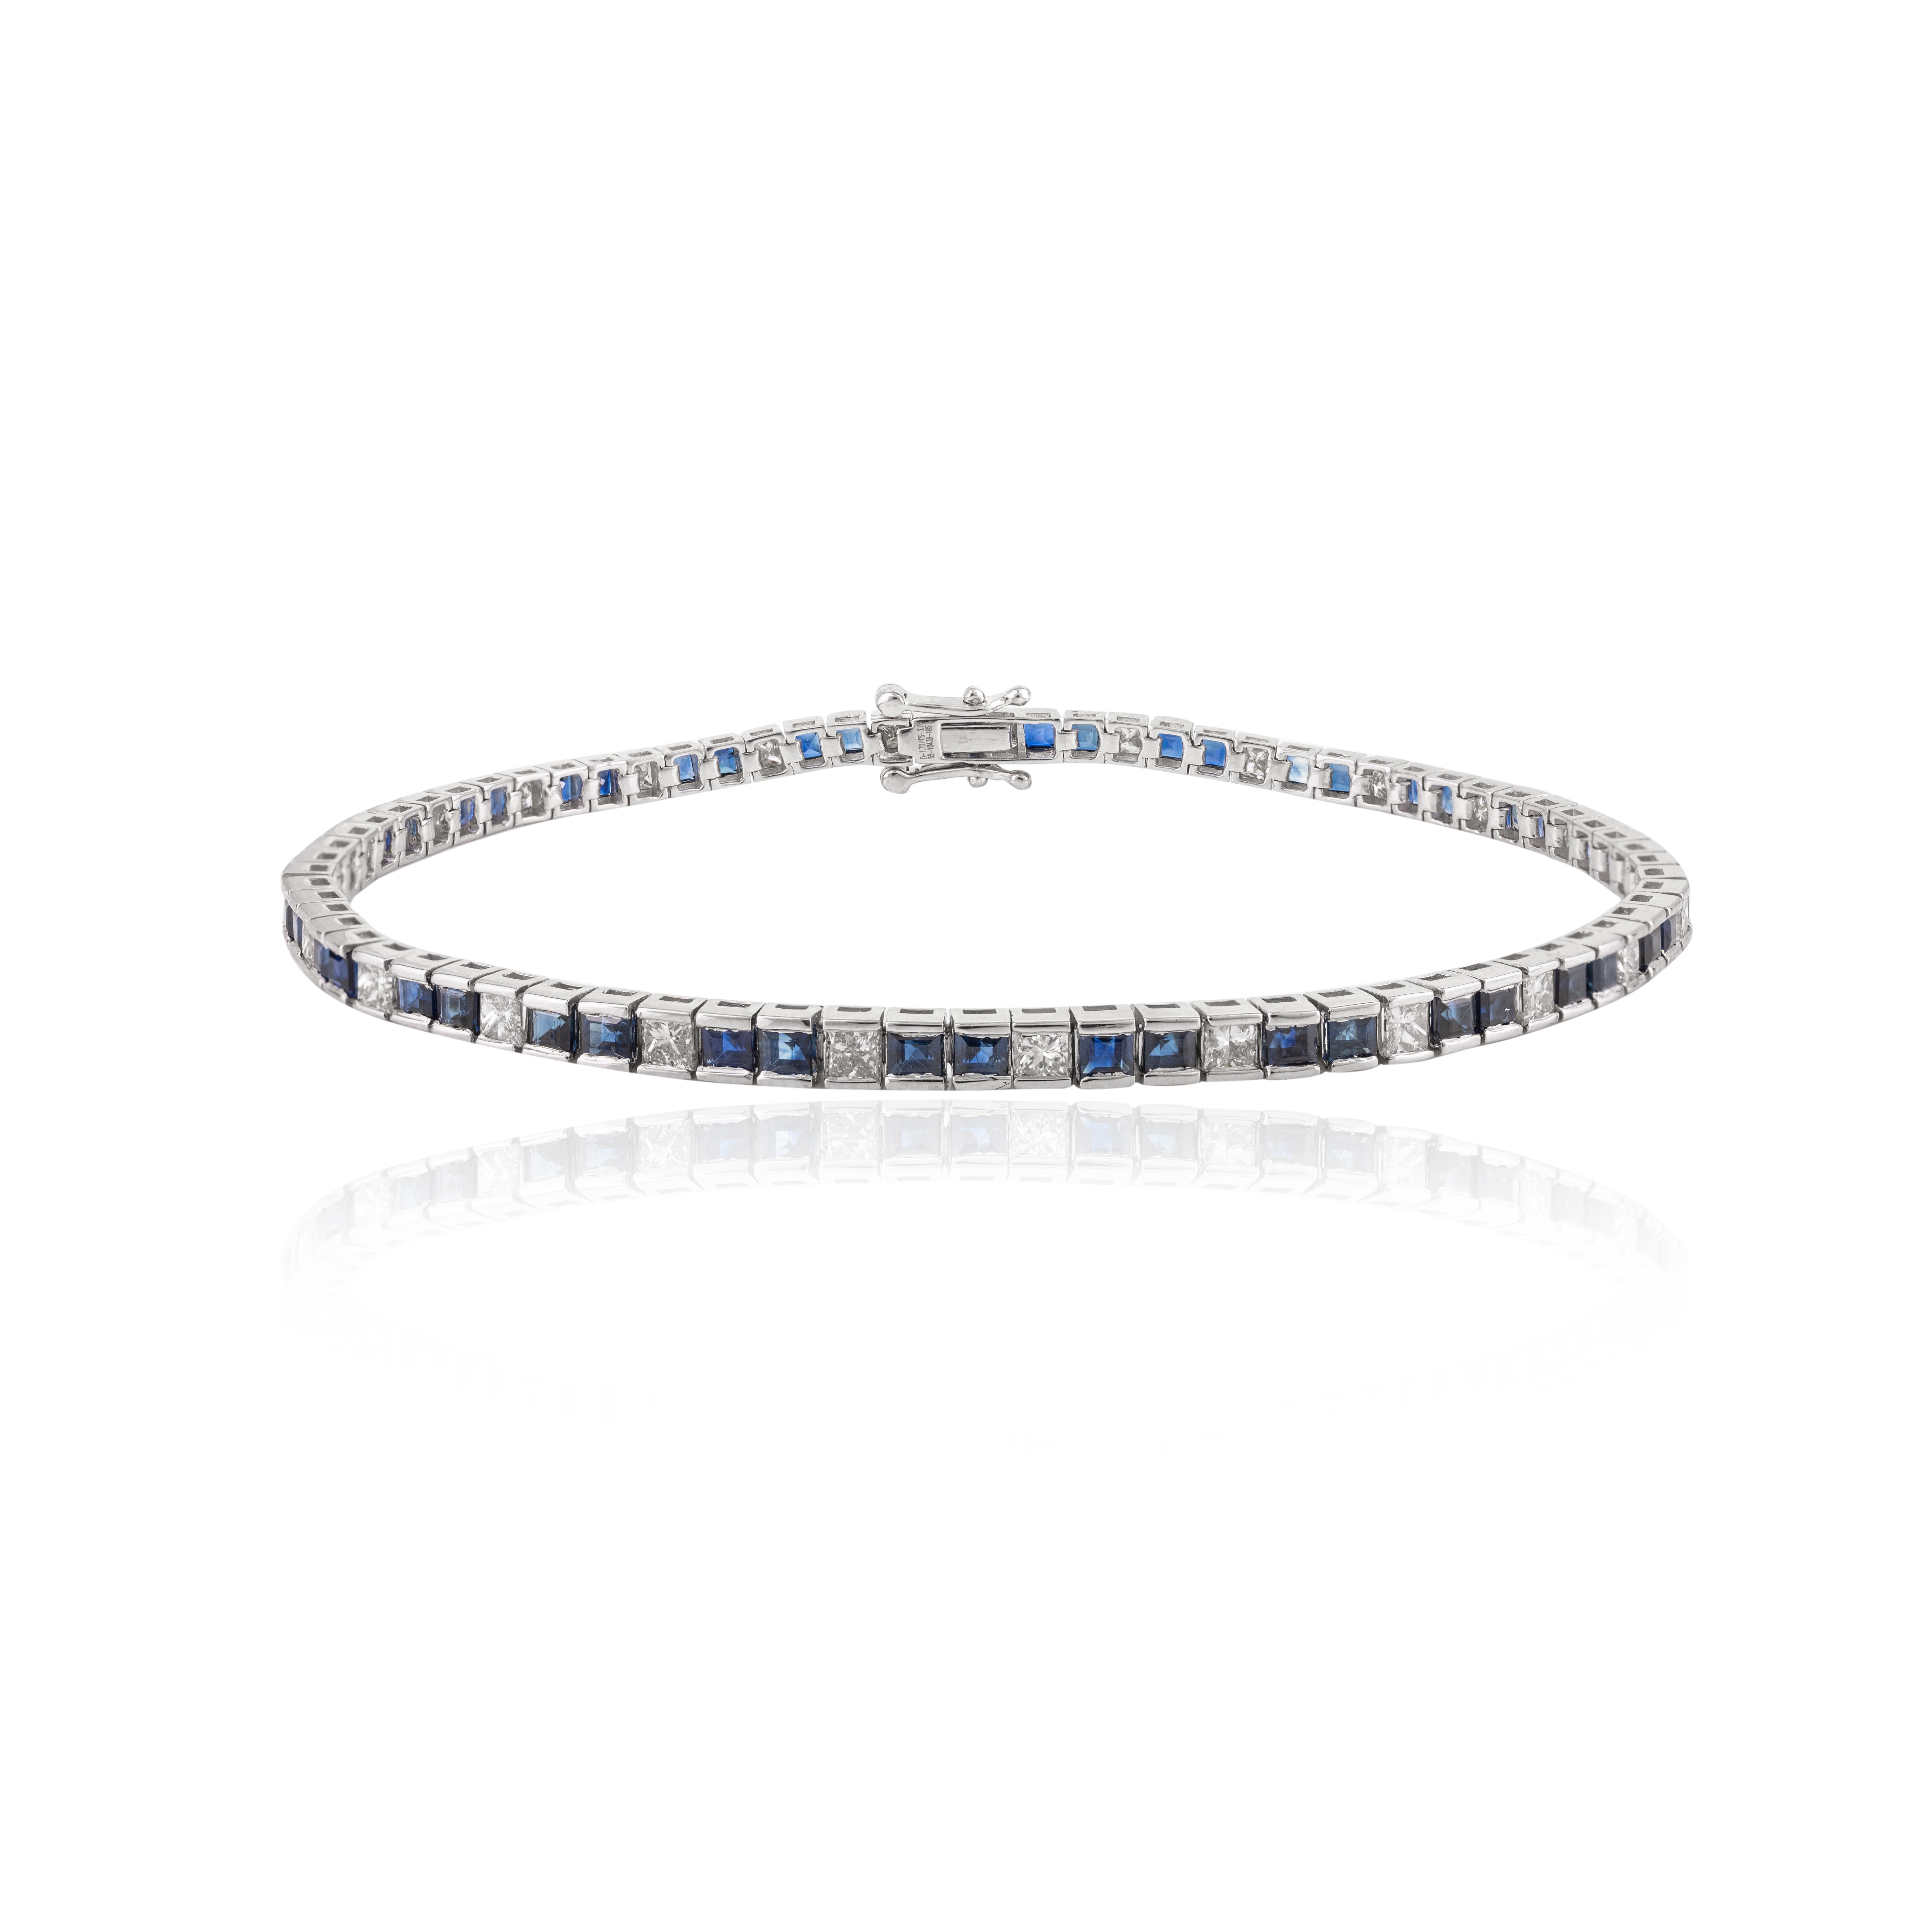 This Natural Blue Sapphire Diamond Tennis Bracelet in 18K gold showcases endlessly sparkling natural blue sapphire of 3.76 carats and 1.72 carats diamonds. It measures 7.5 inches long in length. 
Sapphire stimulates concentration and reduces stress.